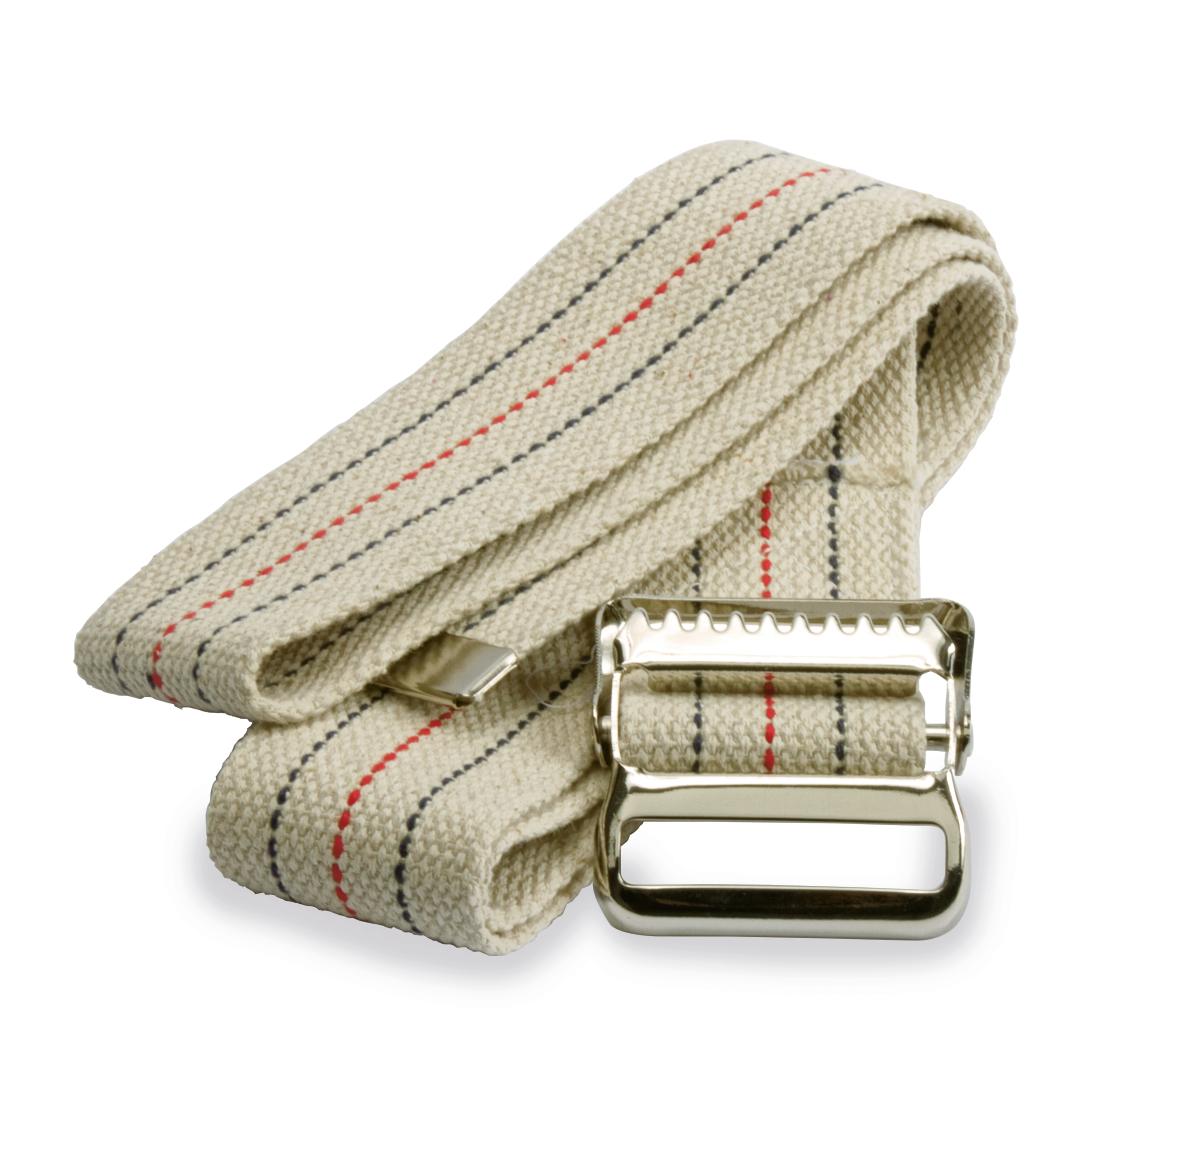 1 Each-Each / Beige with Stripes / Metal Buckle Patient Safety & Mobility - MEDLINE - Wasatch Medical Supply